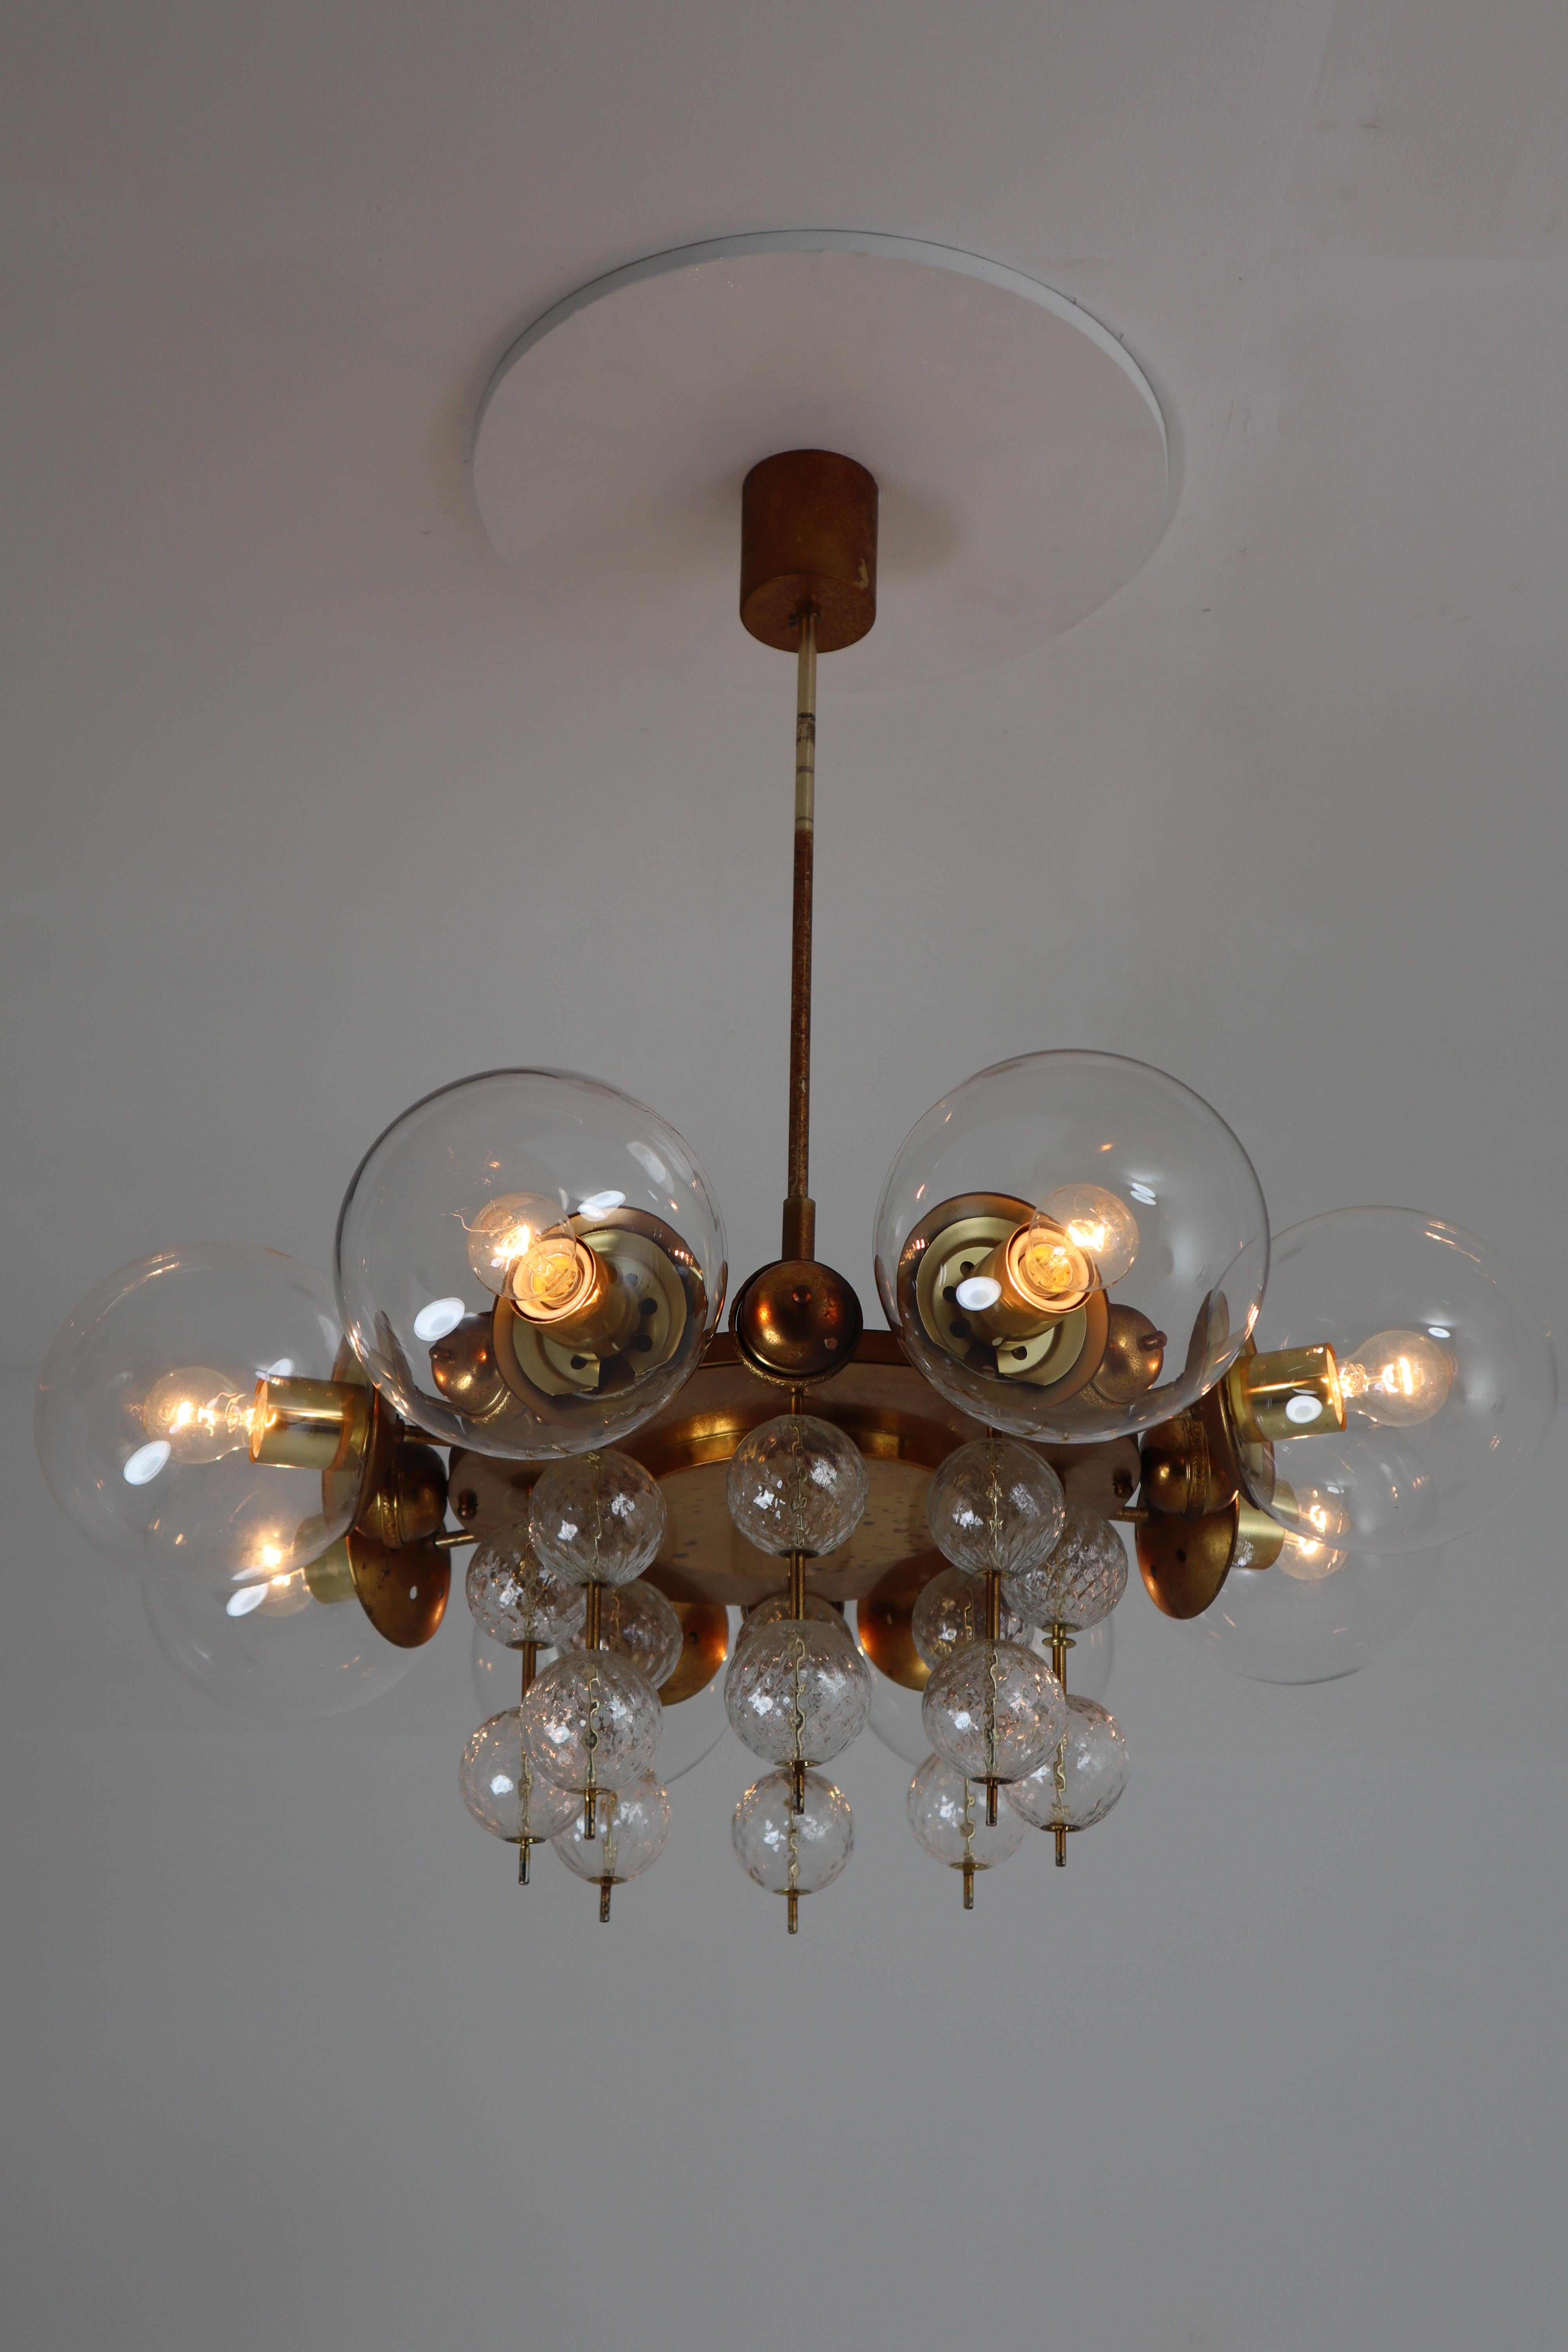 European Midcentury Chandelier with Patinated Brass Fixture, Europe, 1950s